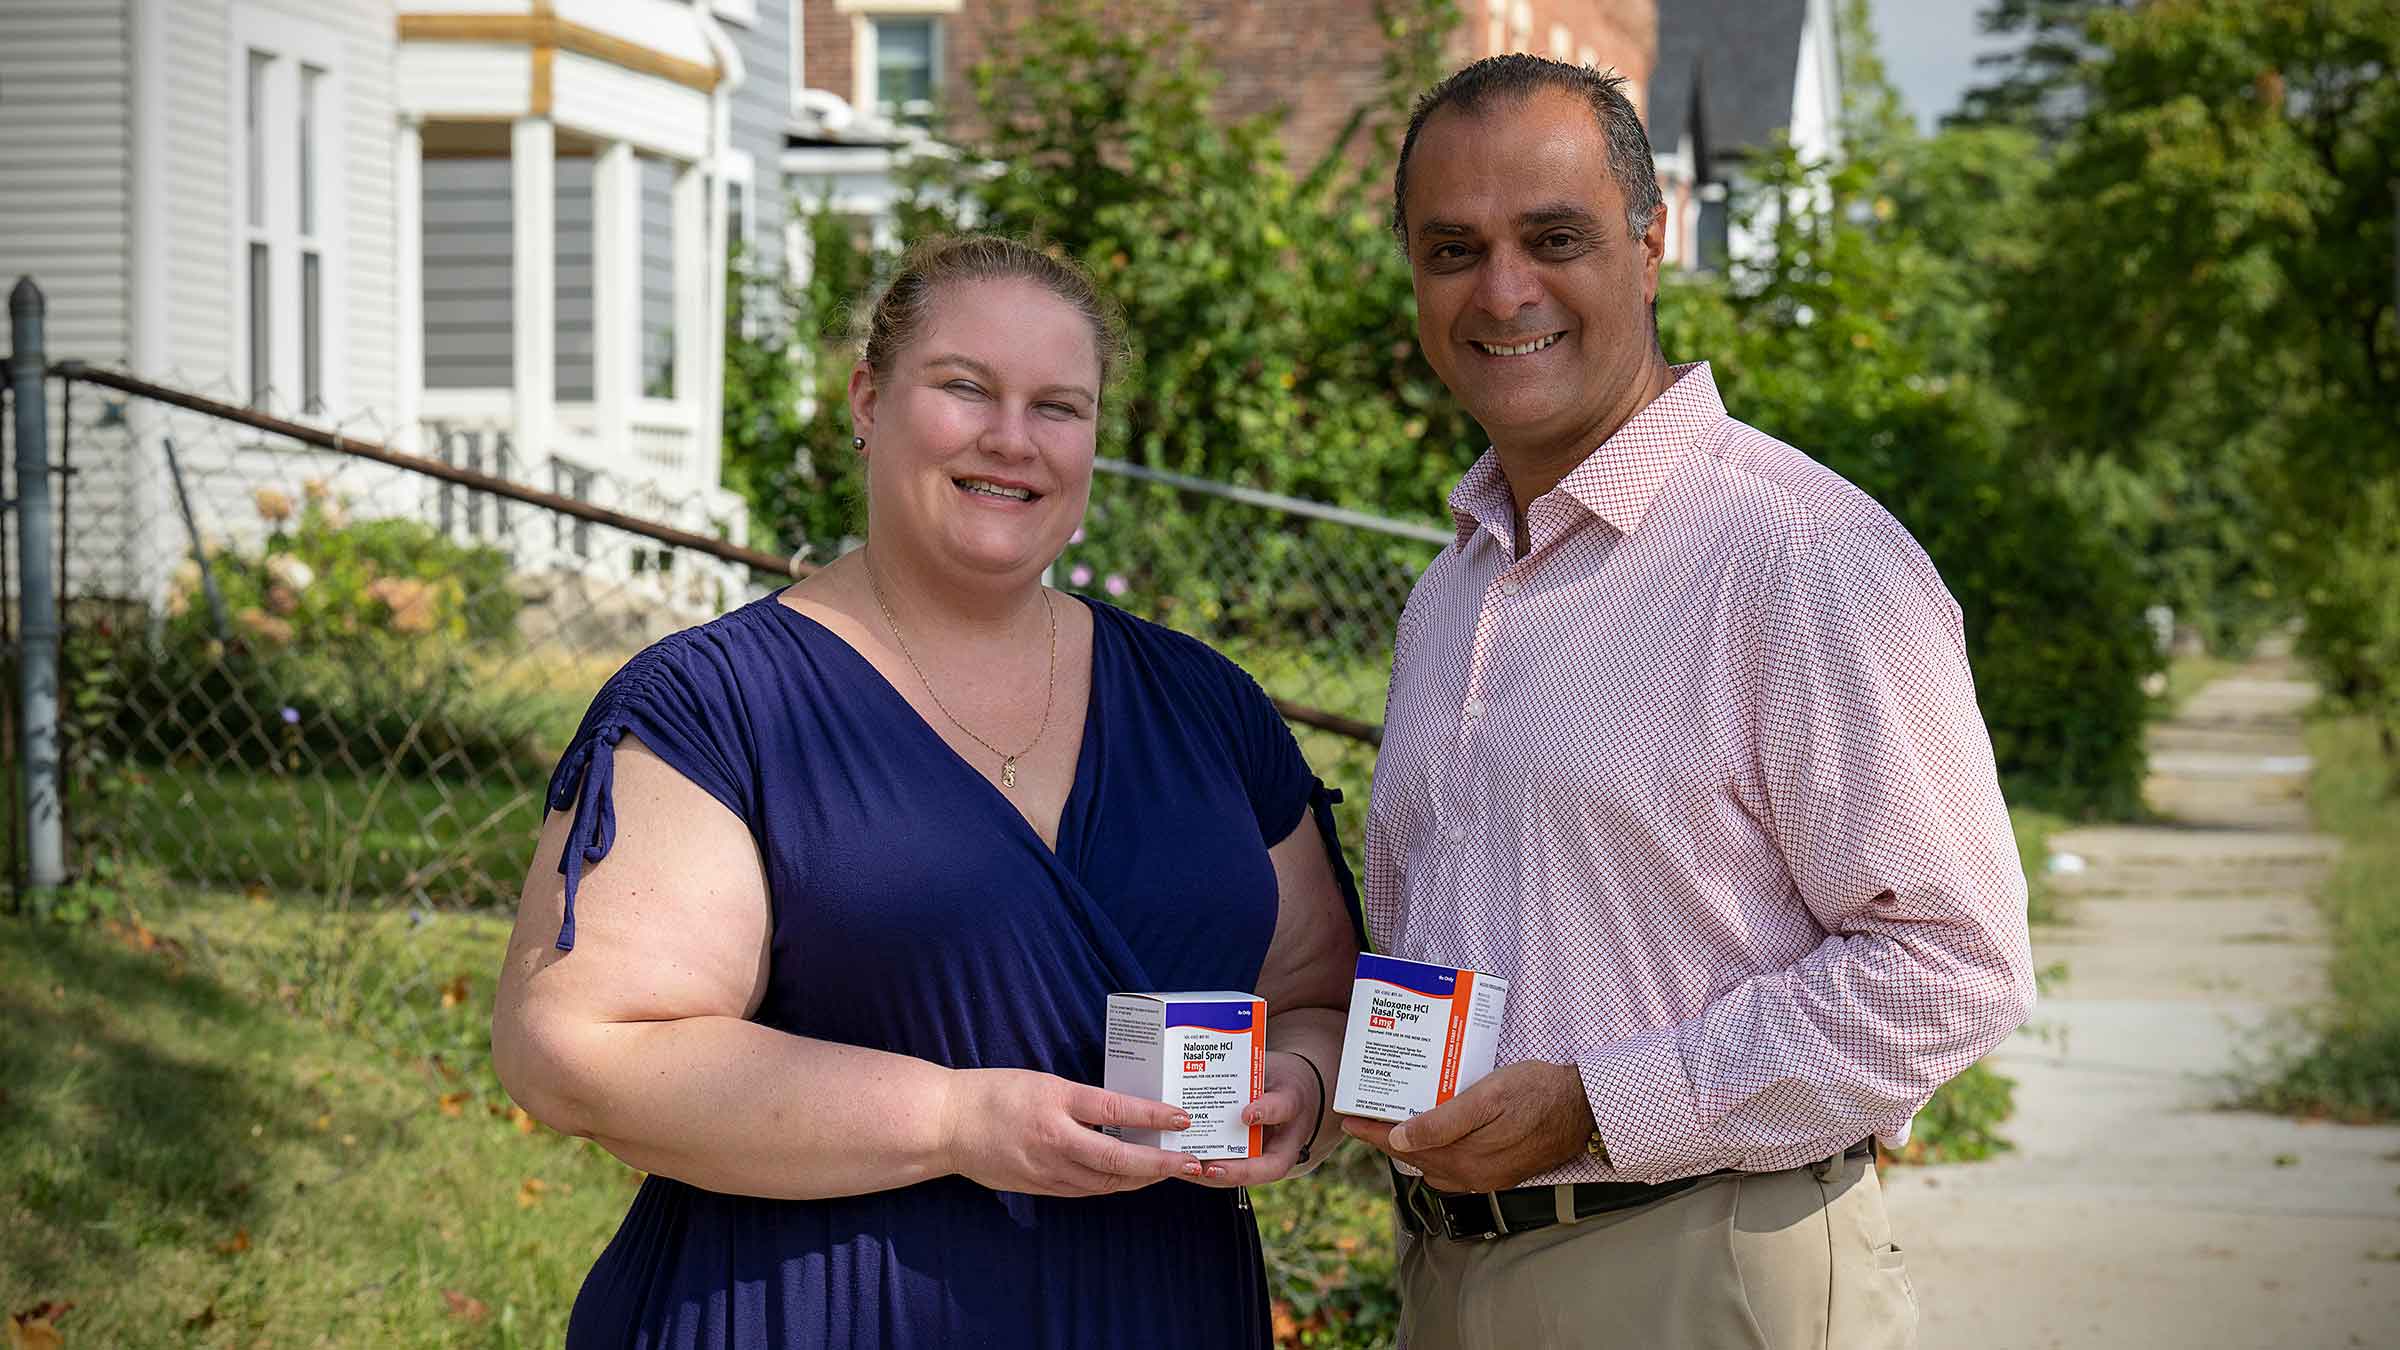 Julie Teater and Mohamad Moinzadeh holding Naloxone boxes